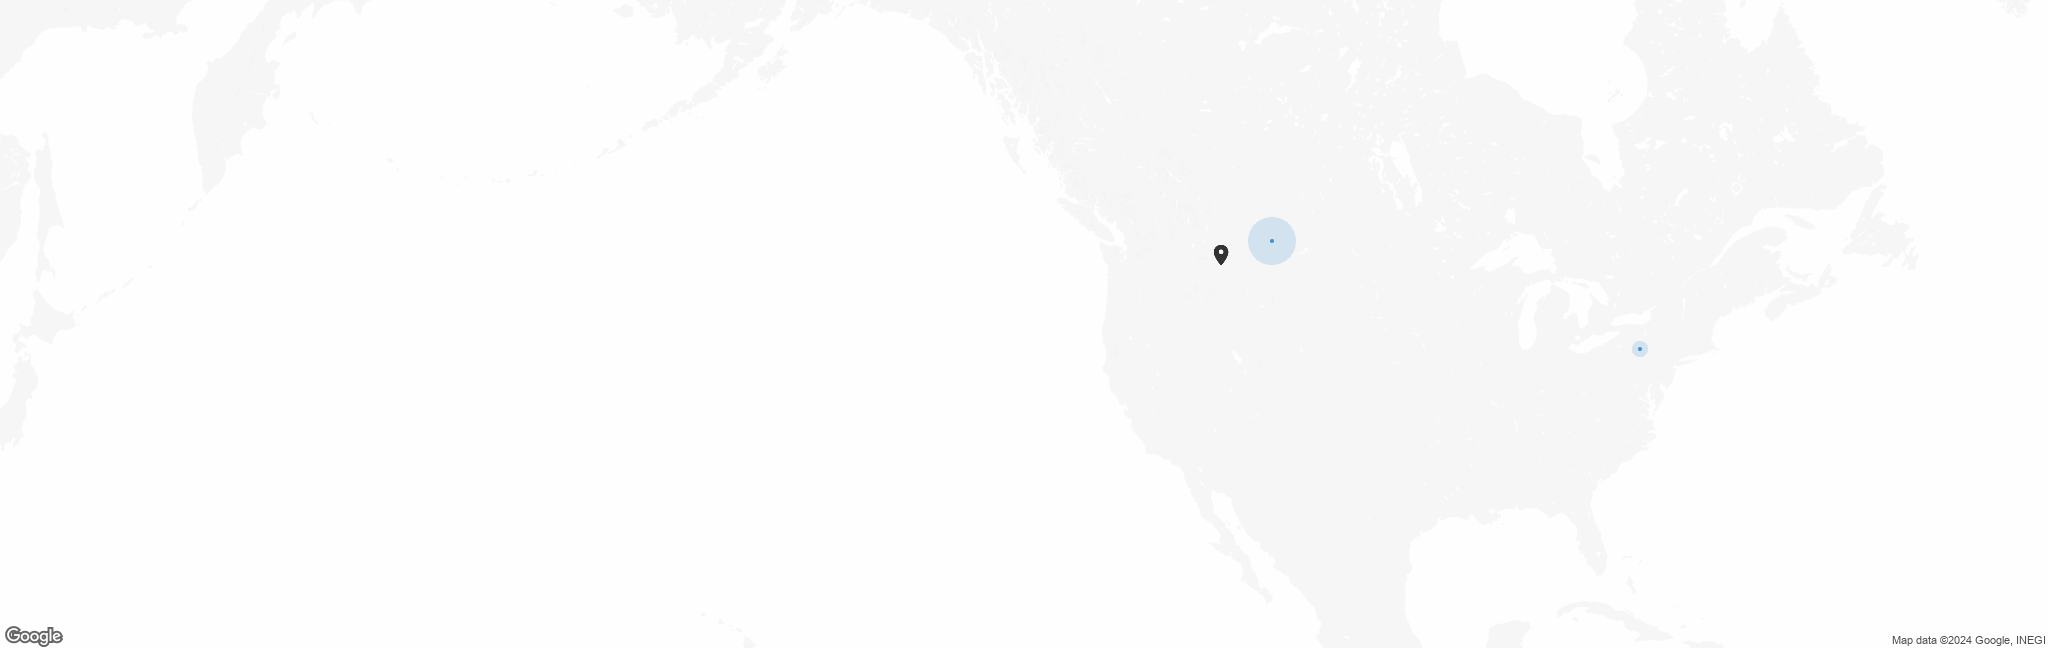 Map of US with pin of Organic Montana location